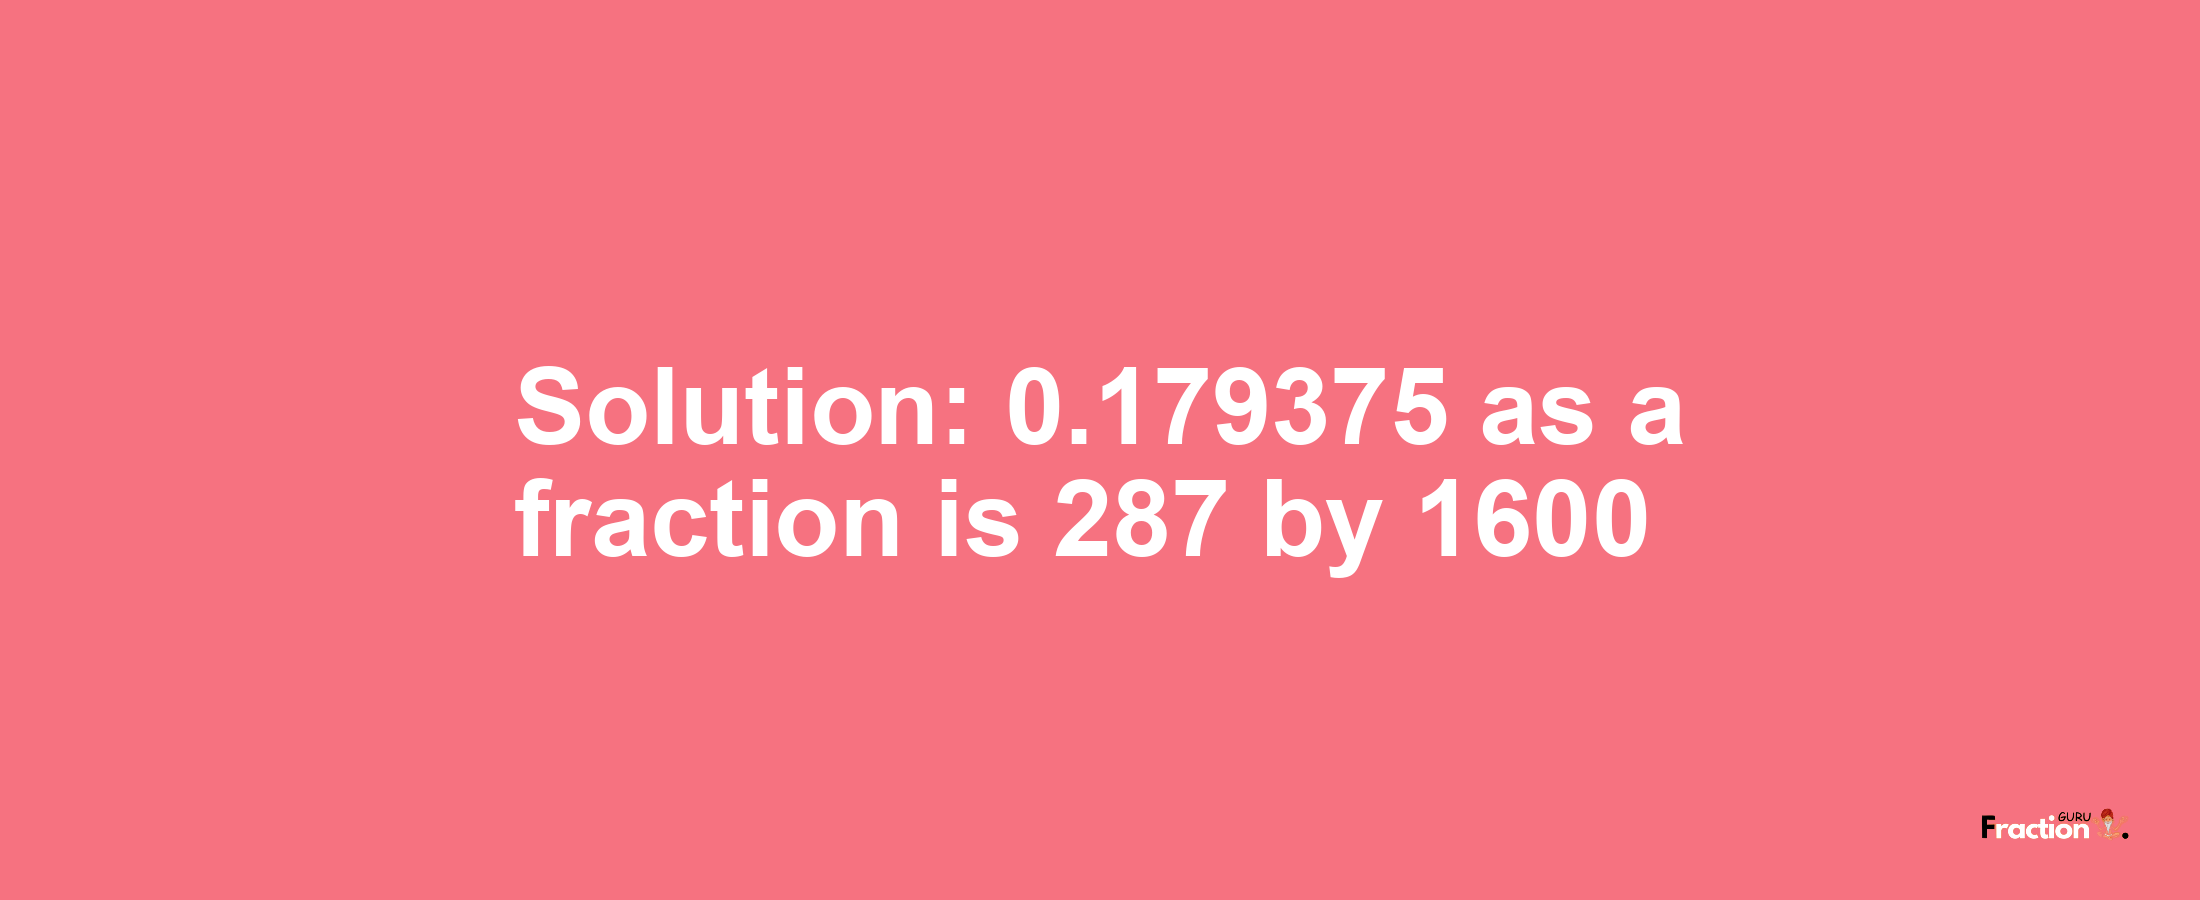 Solution:0.179375 as a fraction is 287/1600